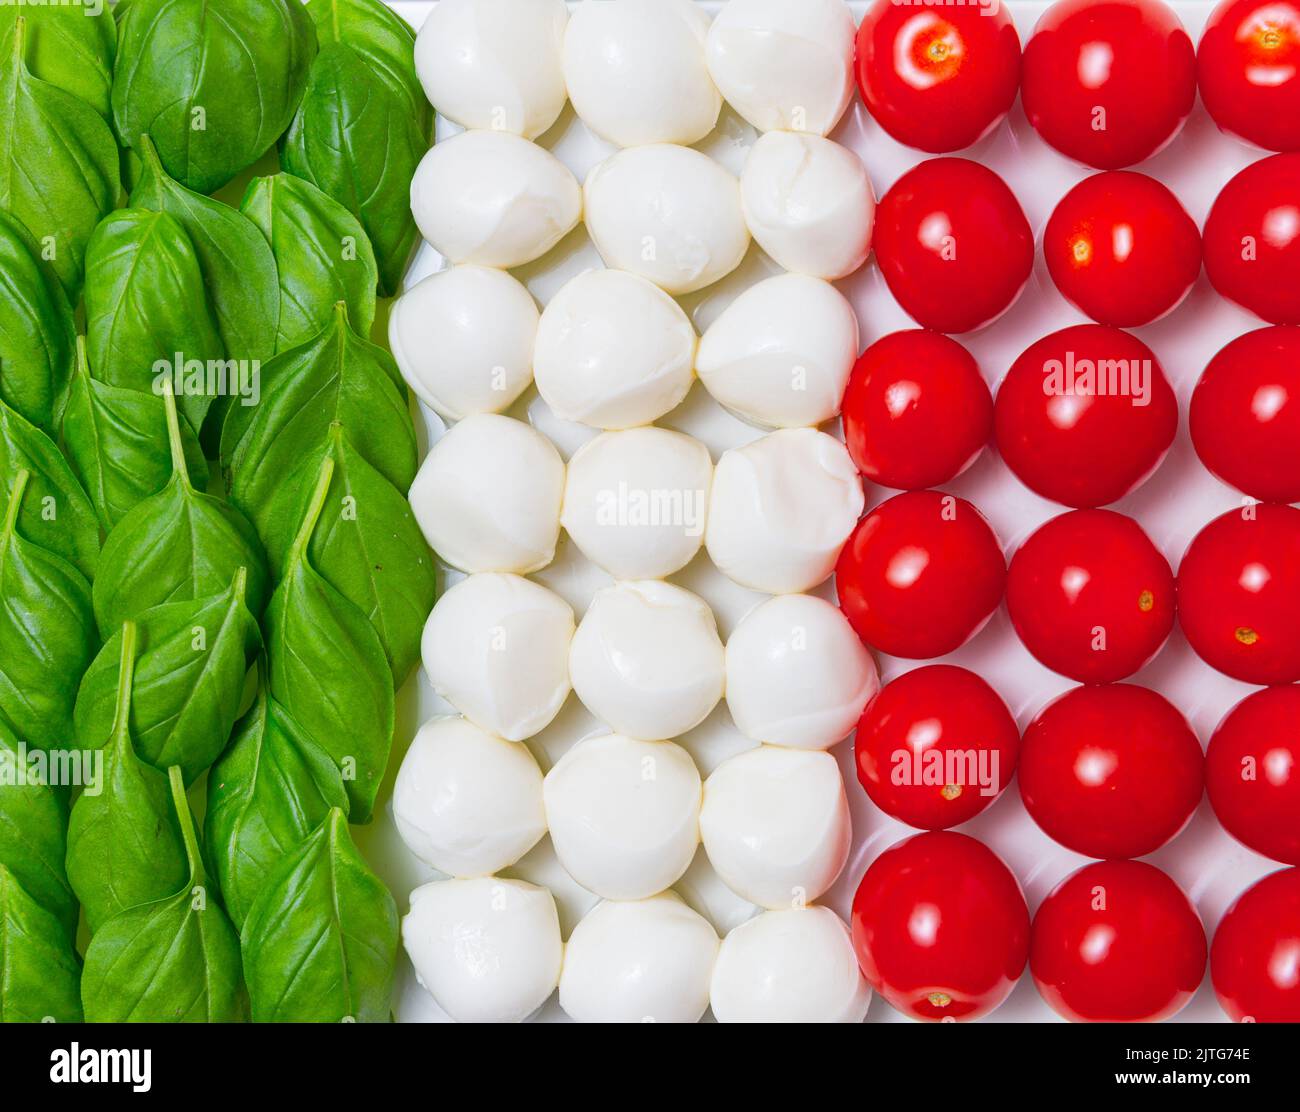 Italian flag made of organic basil, mozzarella cheese and cherry tomatoes on a white background. Advertisement for traditional Italian and Mediterrane Stock Photo